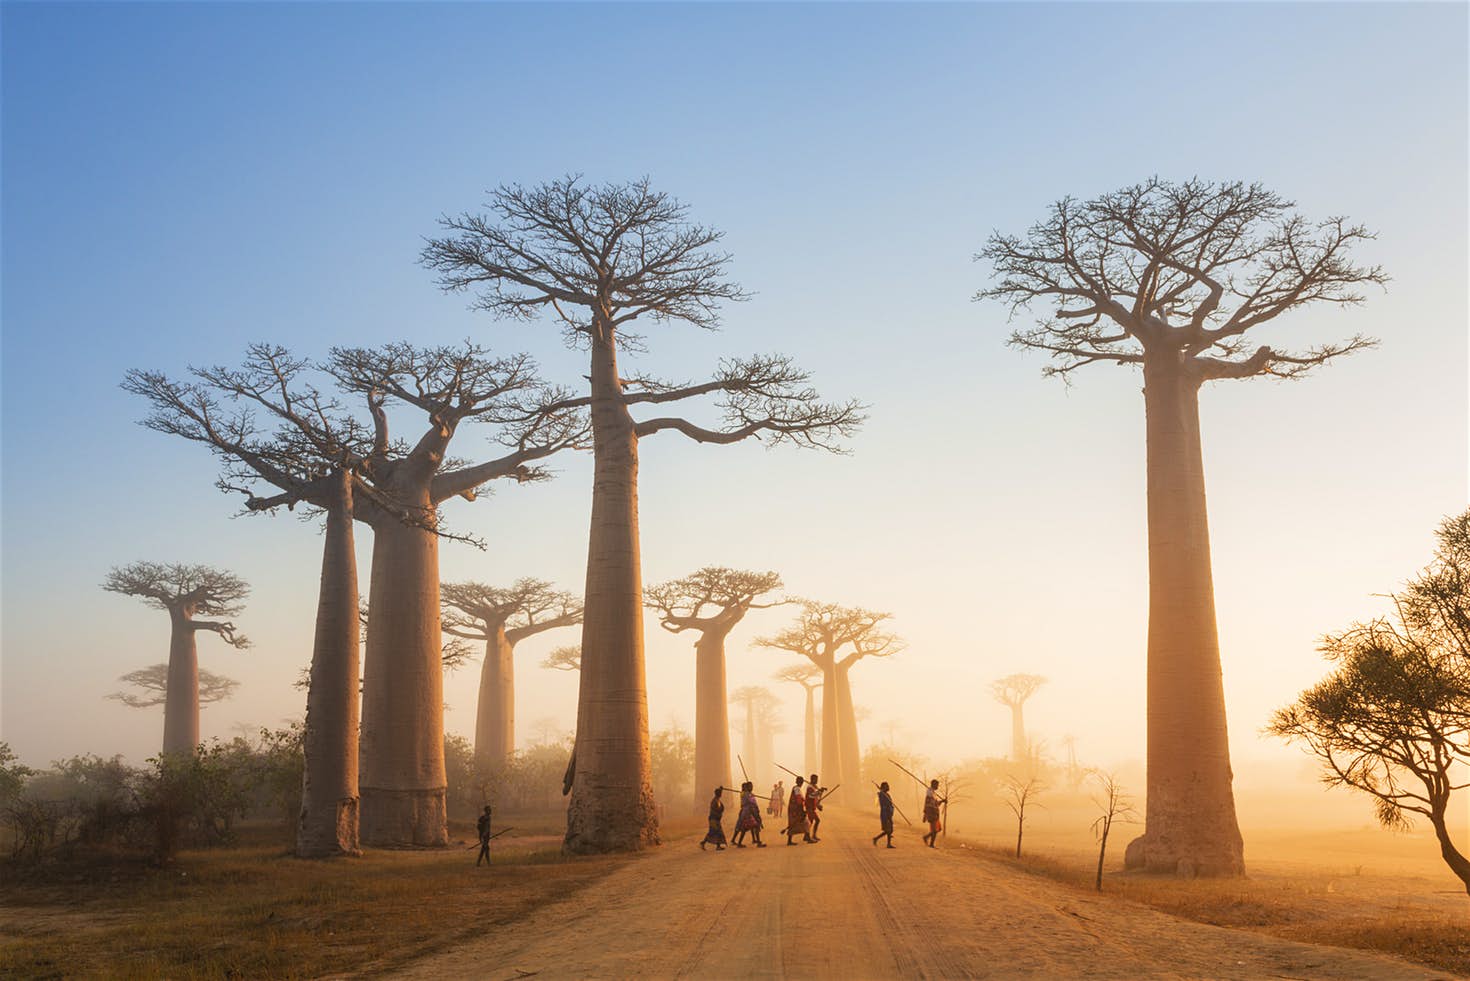 🗺 Can You Locate 18/24 of These Countries in the World? Avenue of the Baobabs, Madagascar